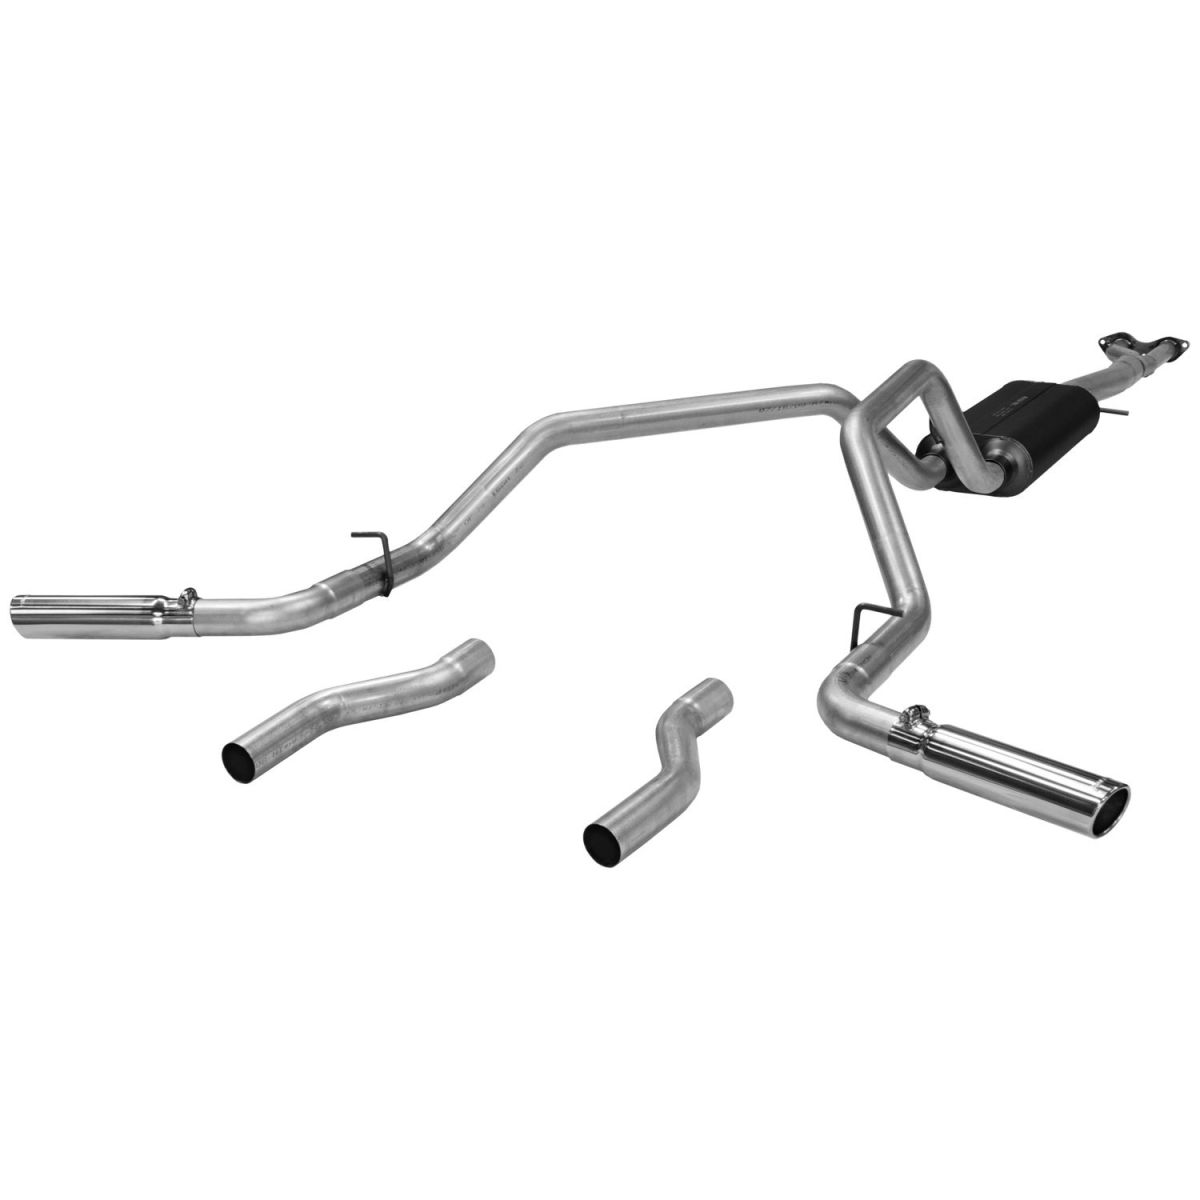 Flowmaster - Flowmaster American Thunder Cat-Back Exhaust For 1996-1999 Chevy/GMC 1500 5.7L